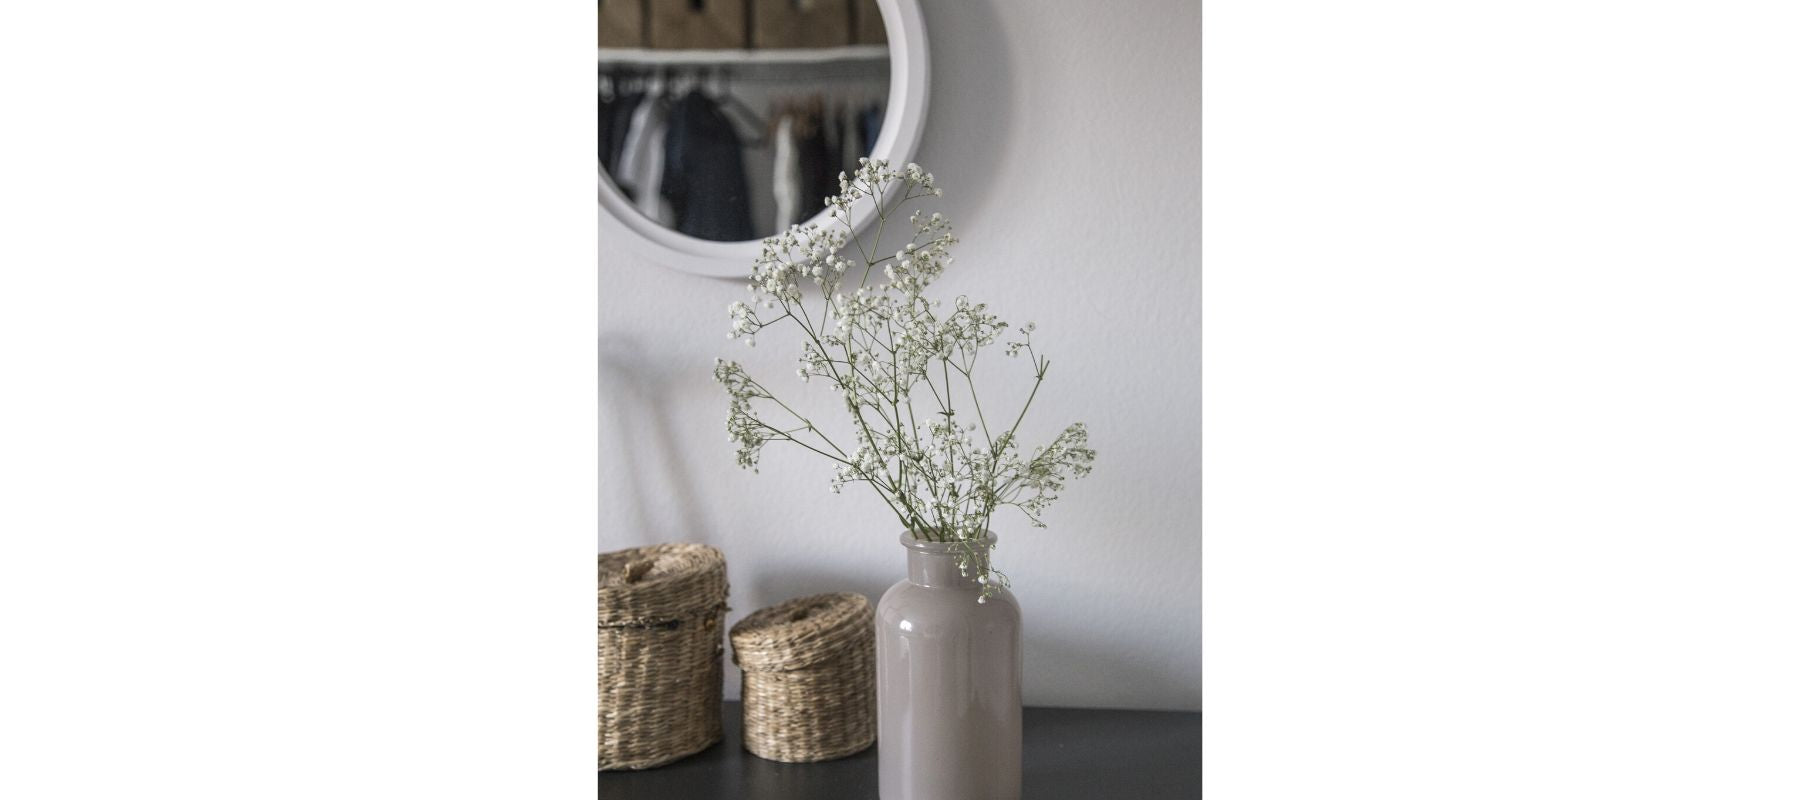 Grey vase with white flowers